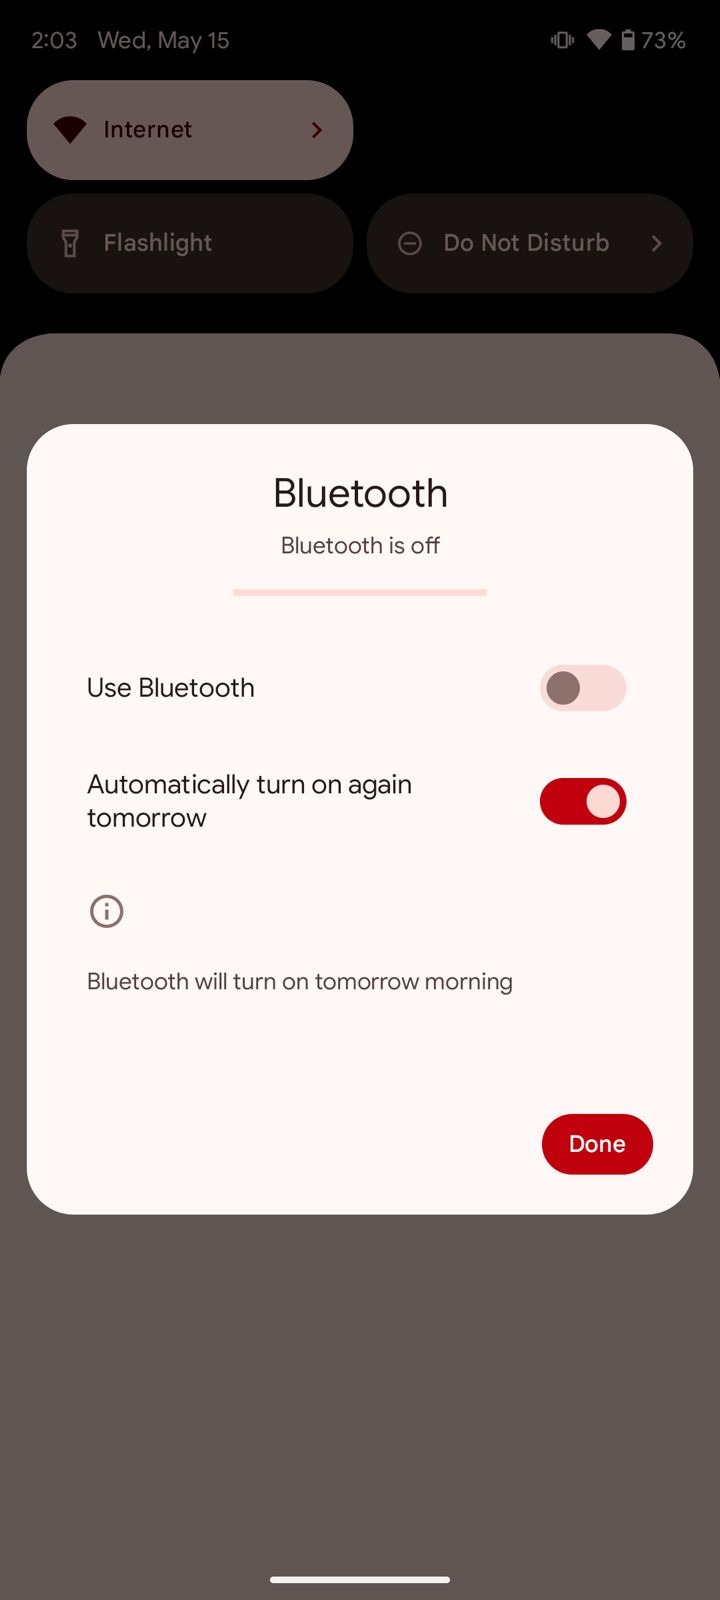 Google is altering the default behaviour of Bluetooth in Android 15.